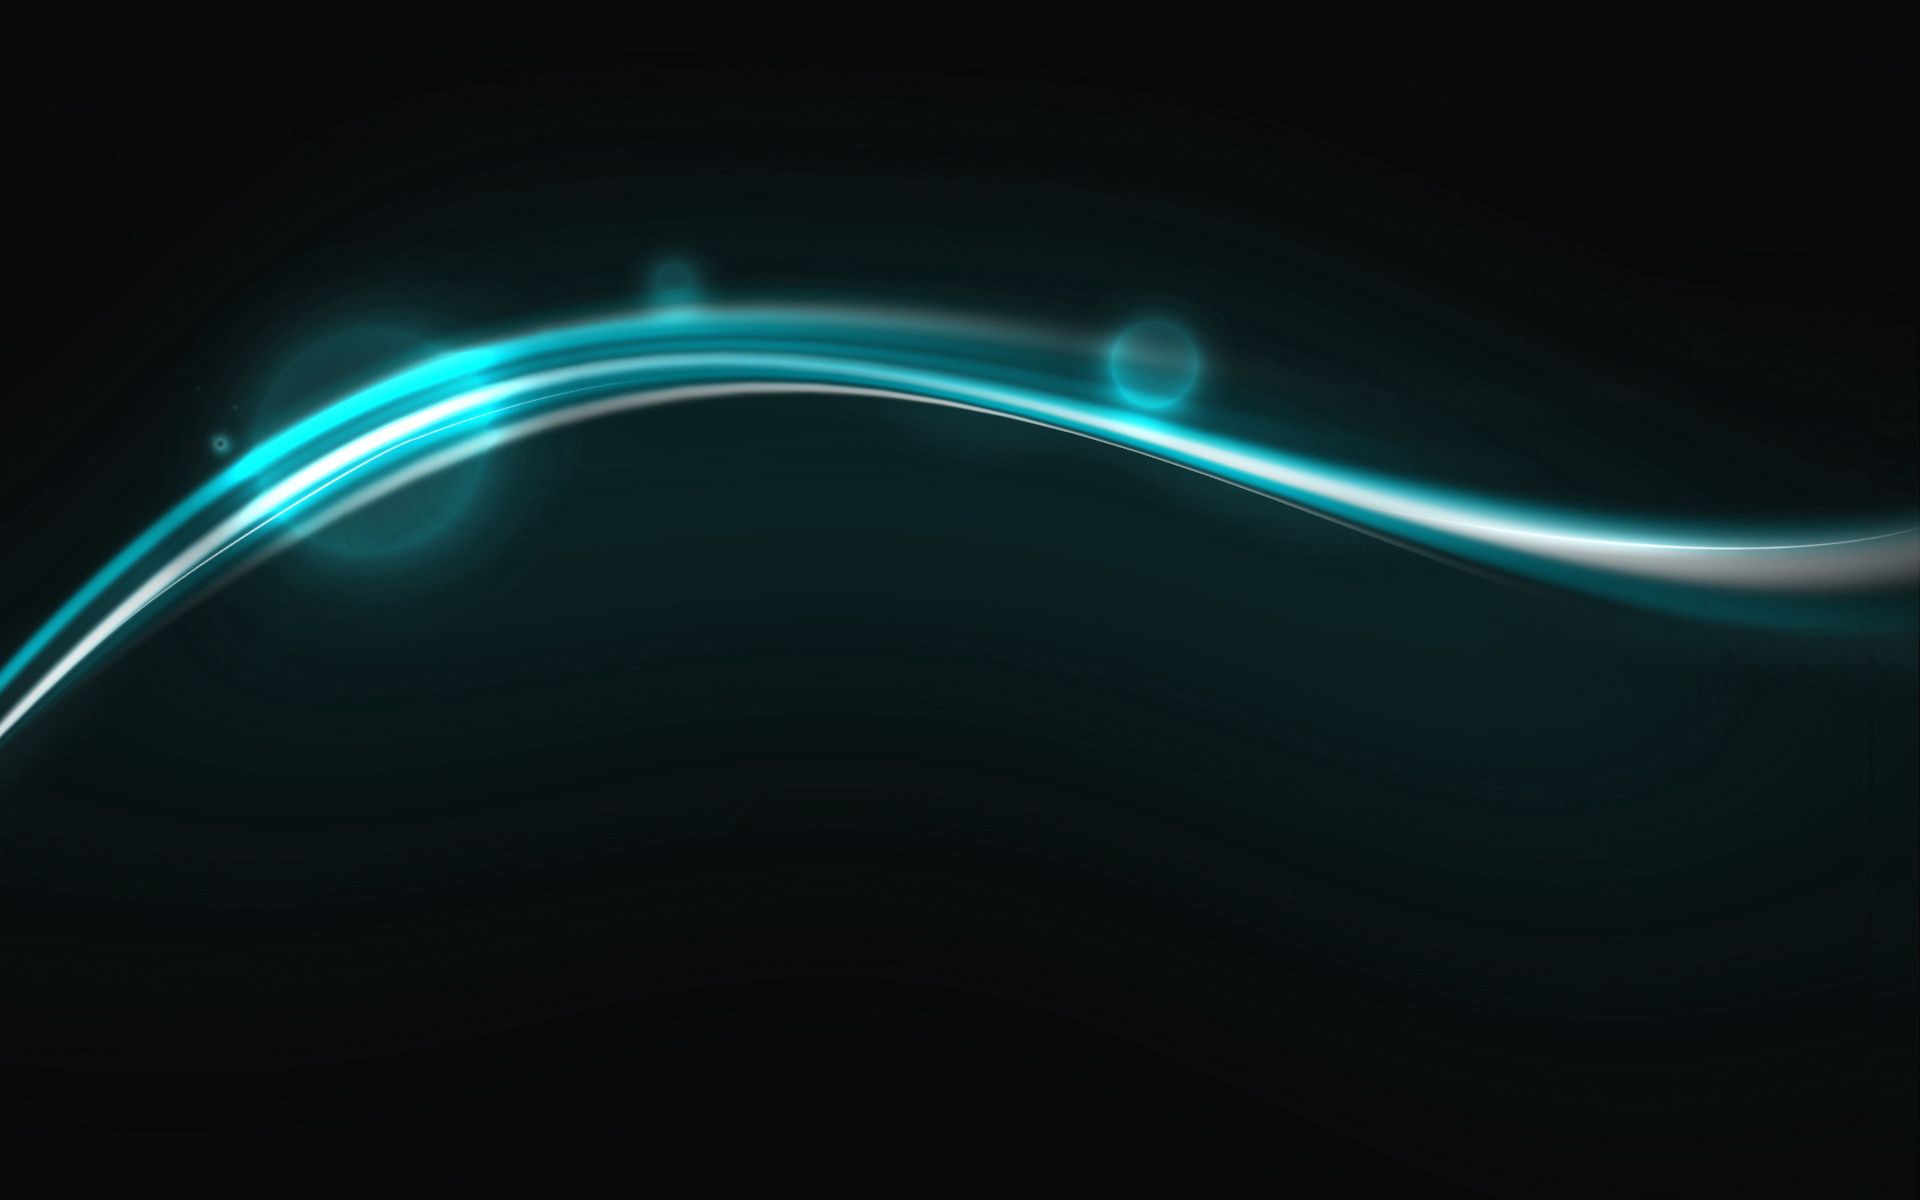 143536 1920x1200 PC pictures for free, download neon, wave, glare, light 1920x1200 wallpapers on your desktop